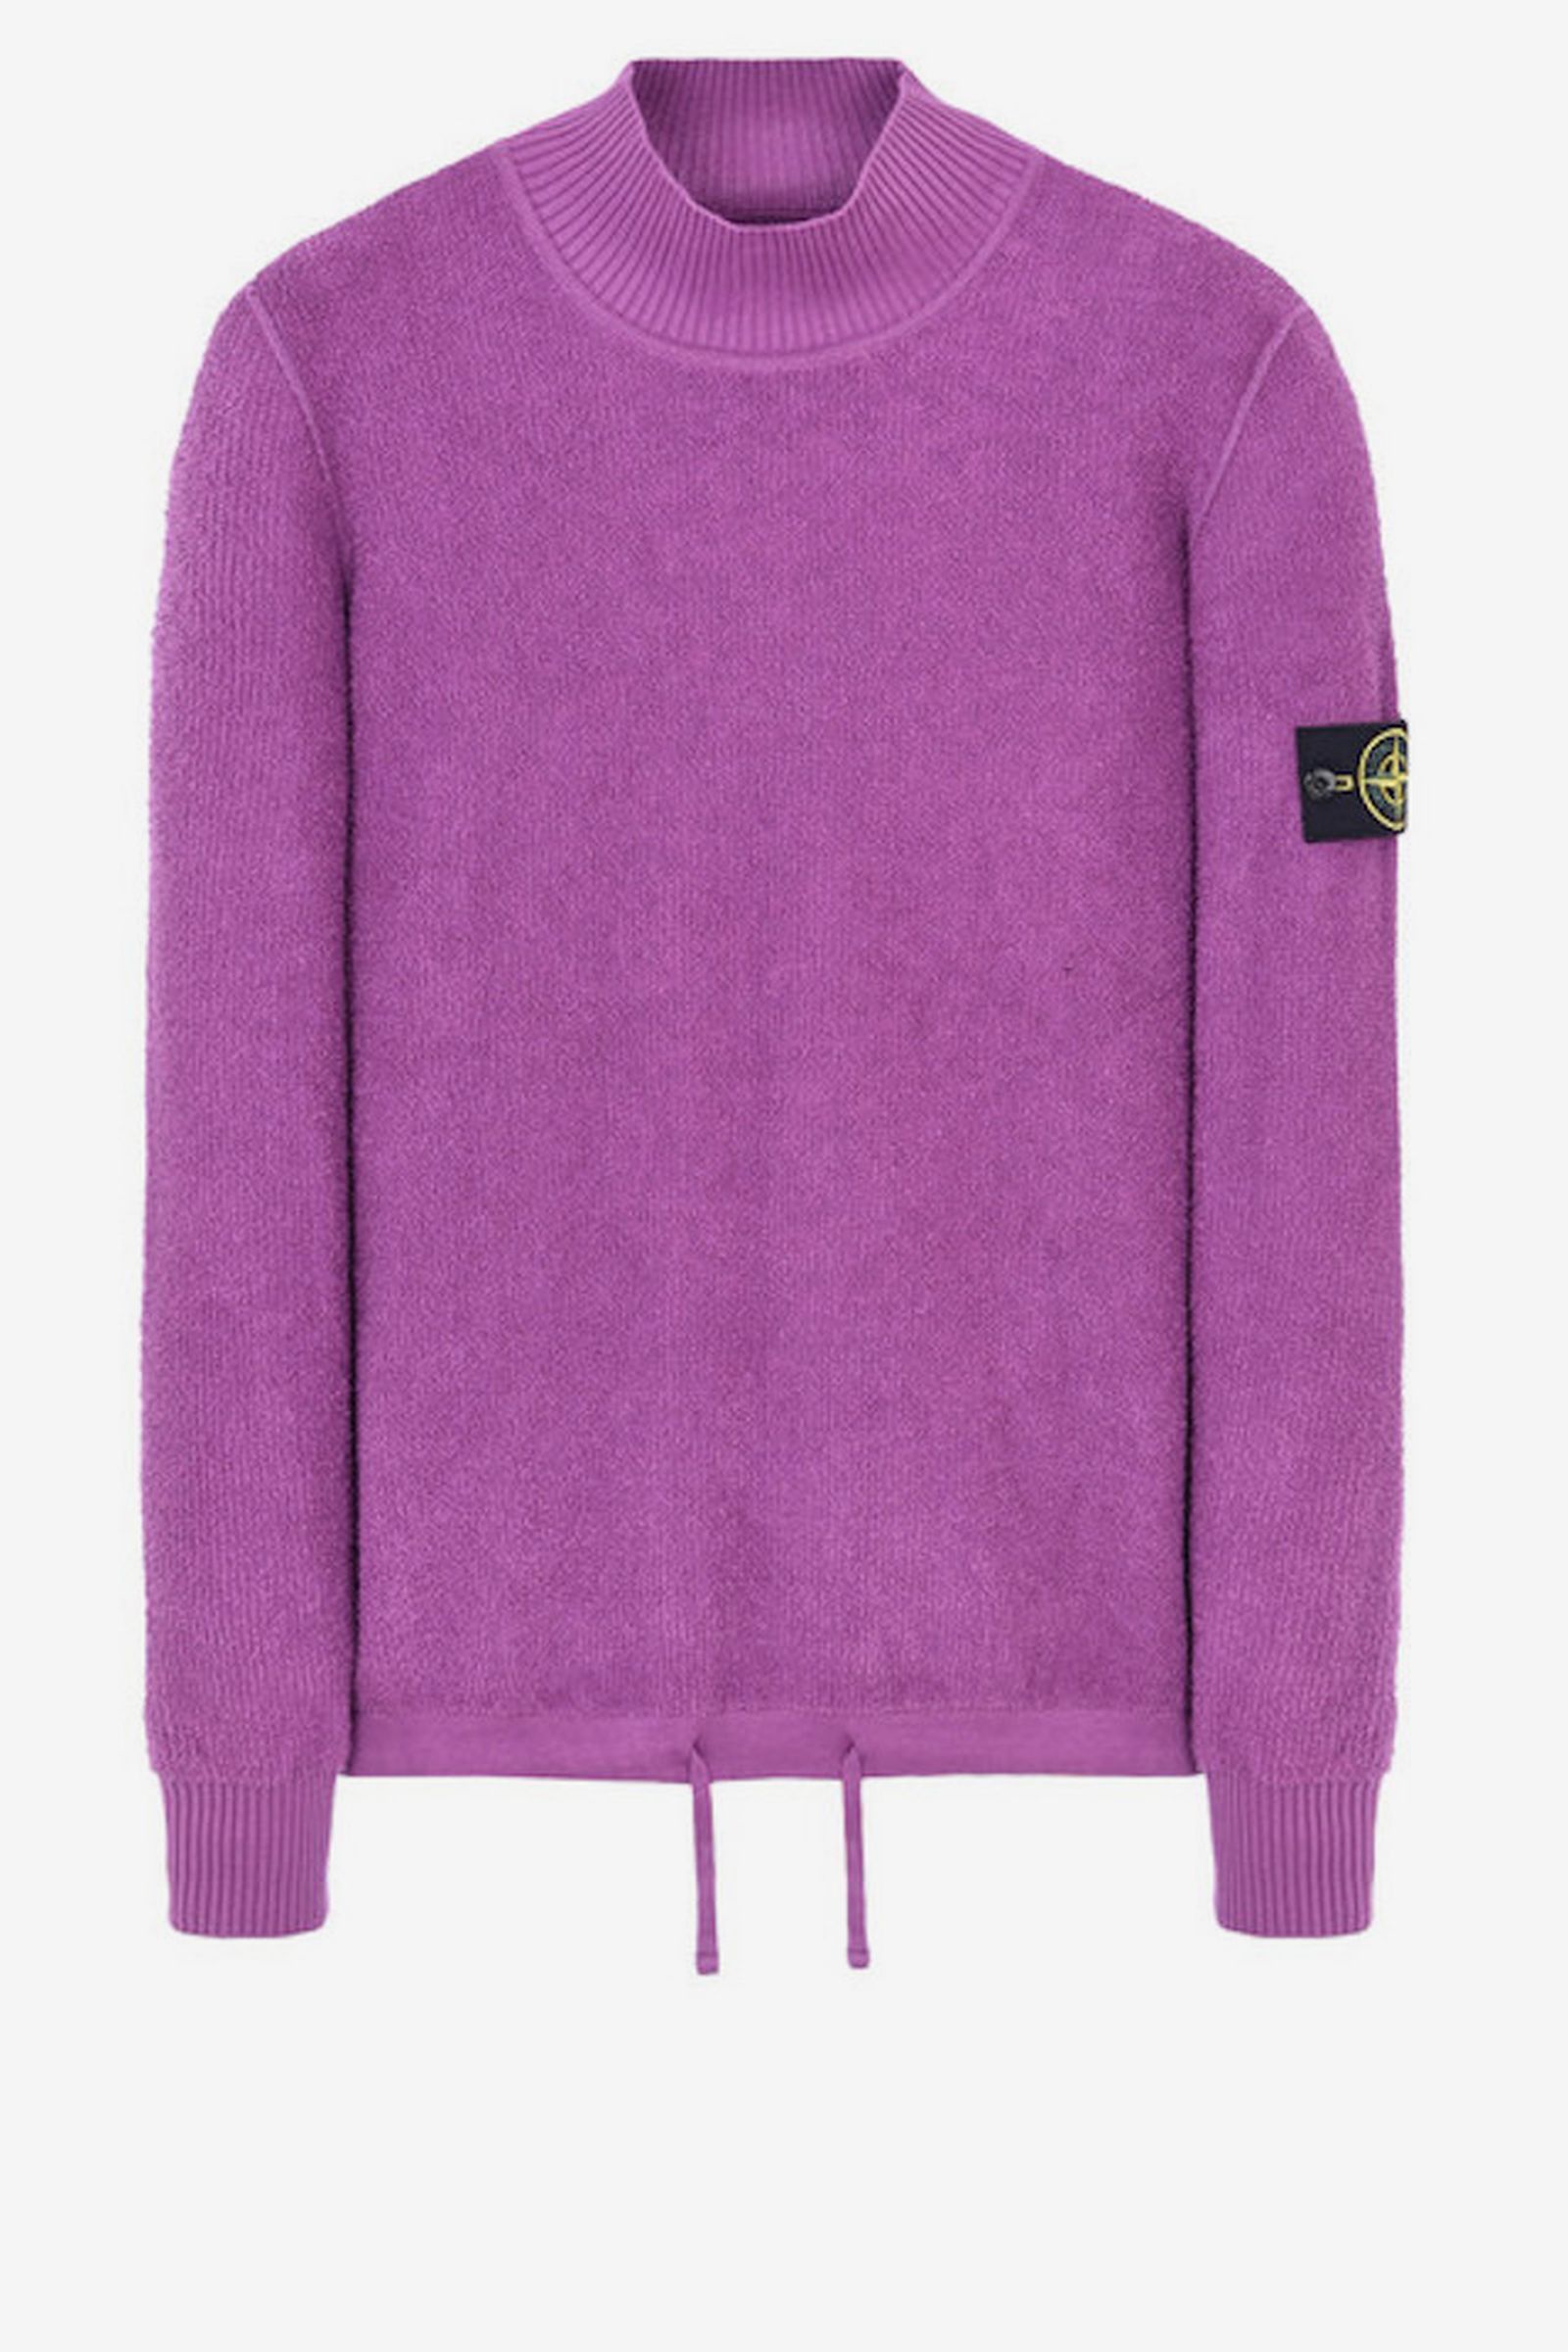 Stone Island Debuts Vibrant Fall Knitwear Collection